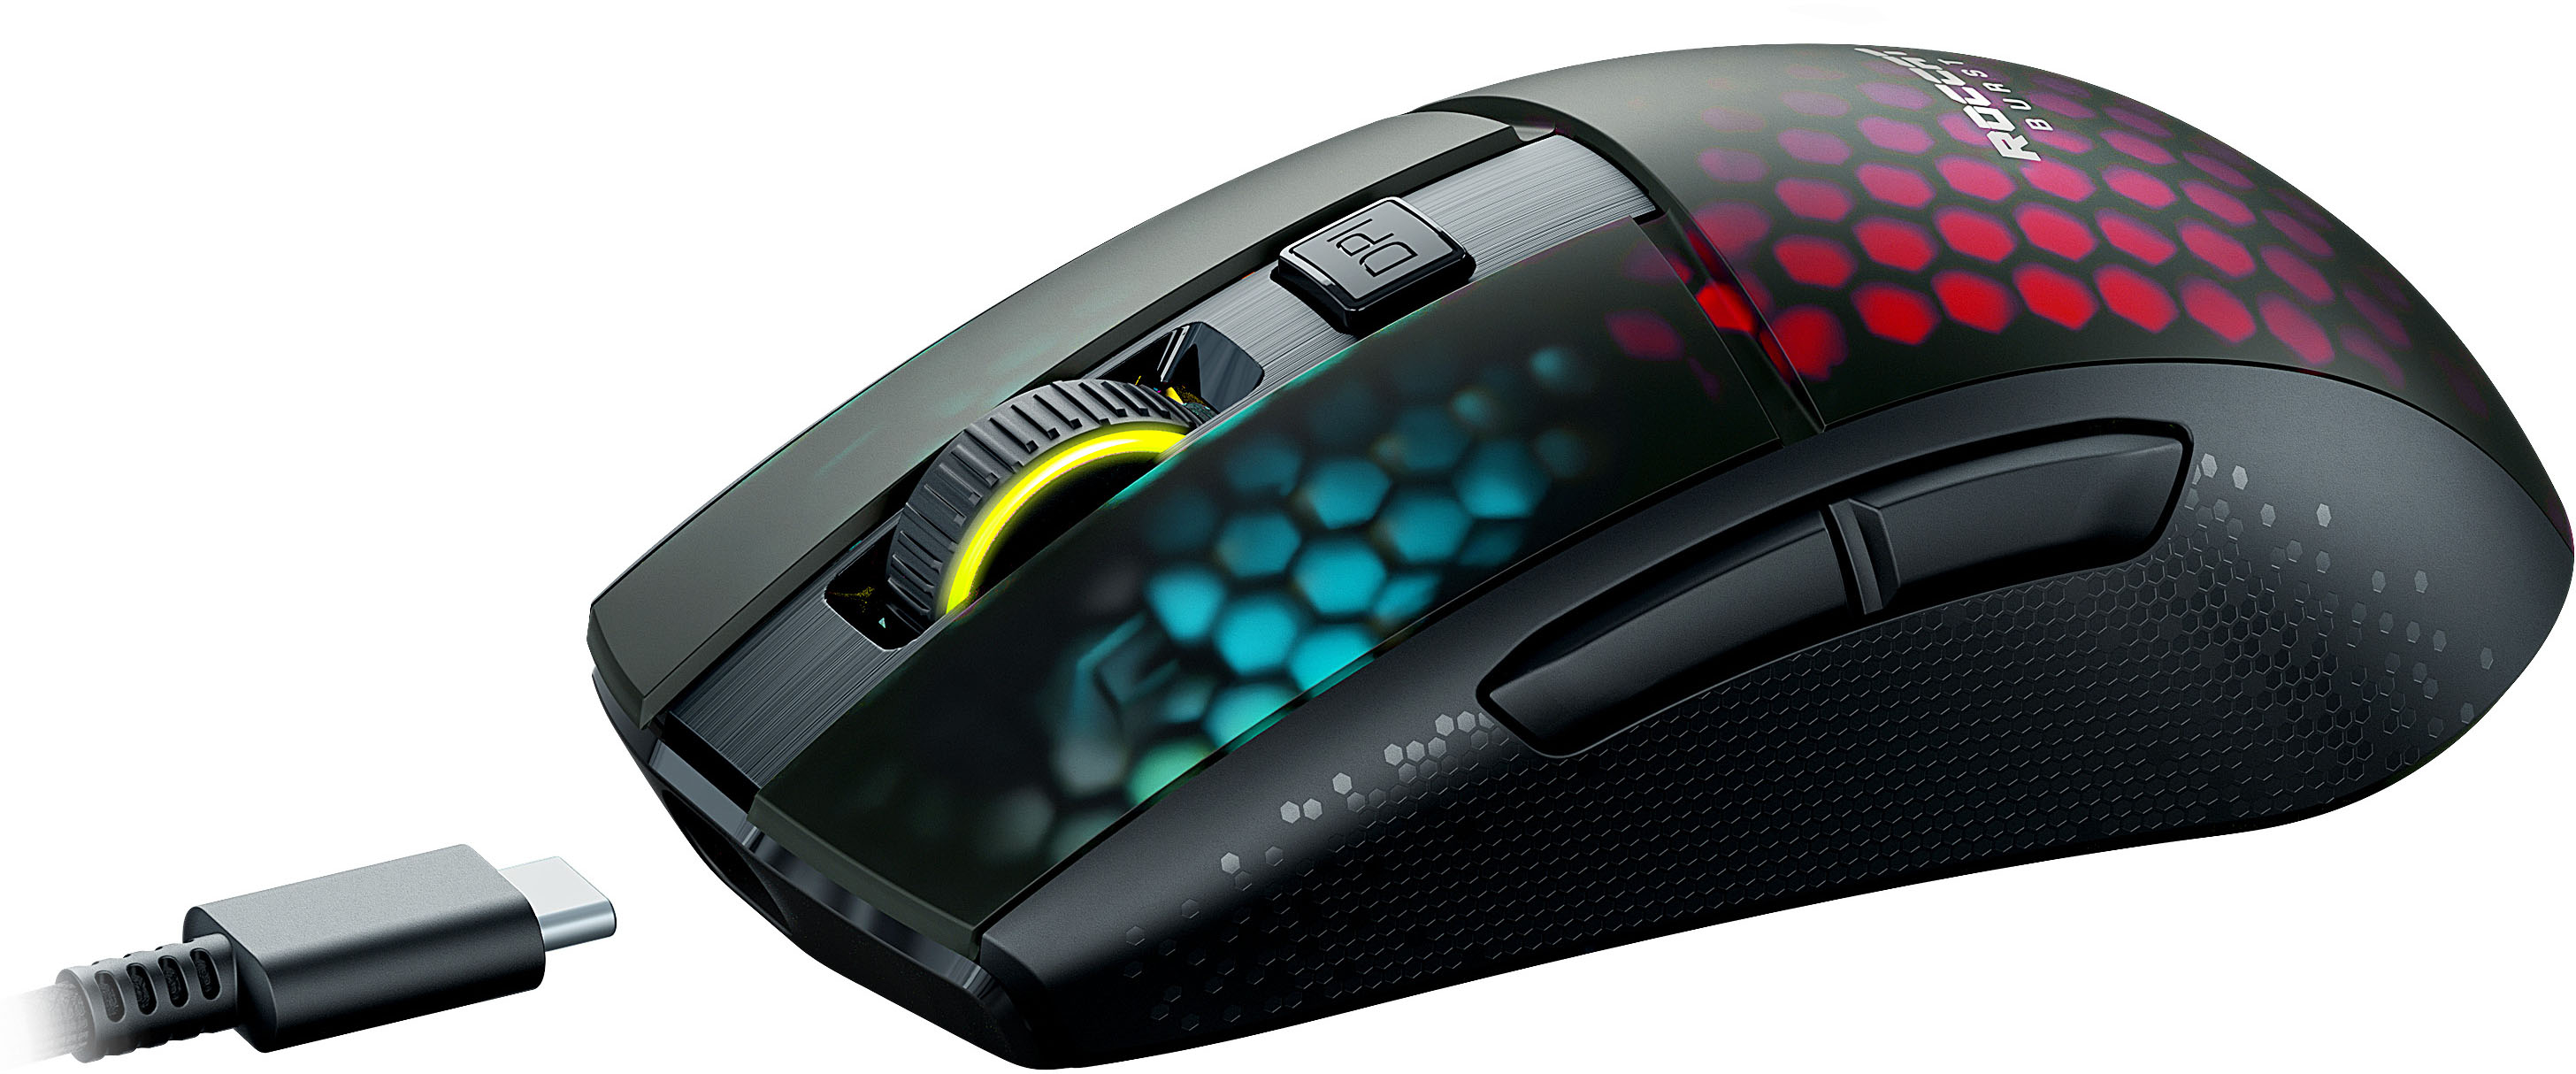 ROCCAT Burst Pro Air Lightweight Wireless Optical Gaming Ambidextrous Mouse  with AIMO Lighting Black ROC-11-430 - Best Buy